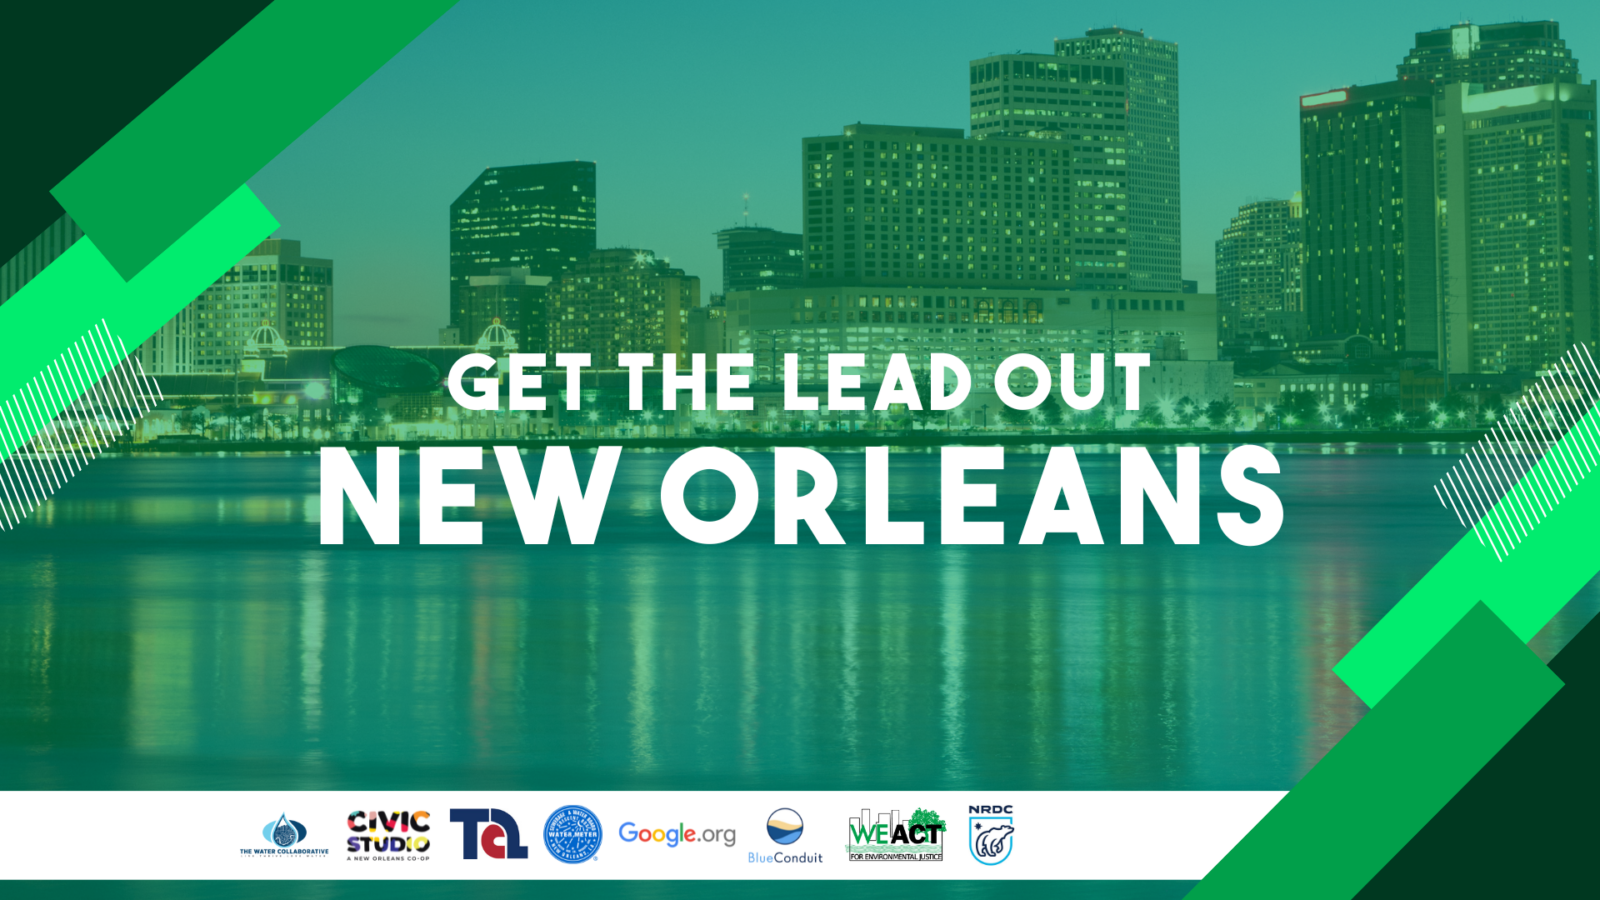 Coalition of organizations collaborate to Get the lead out of New Orleans